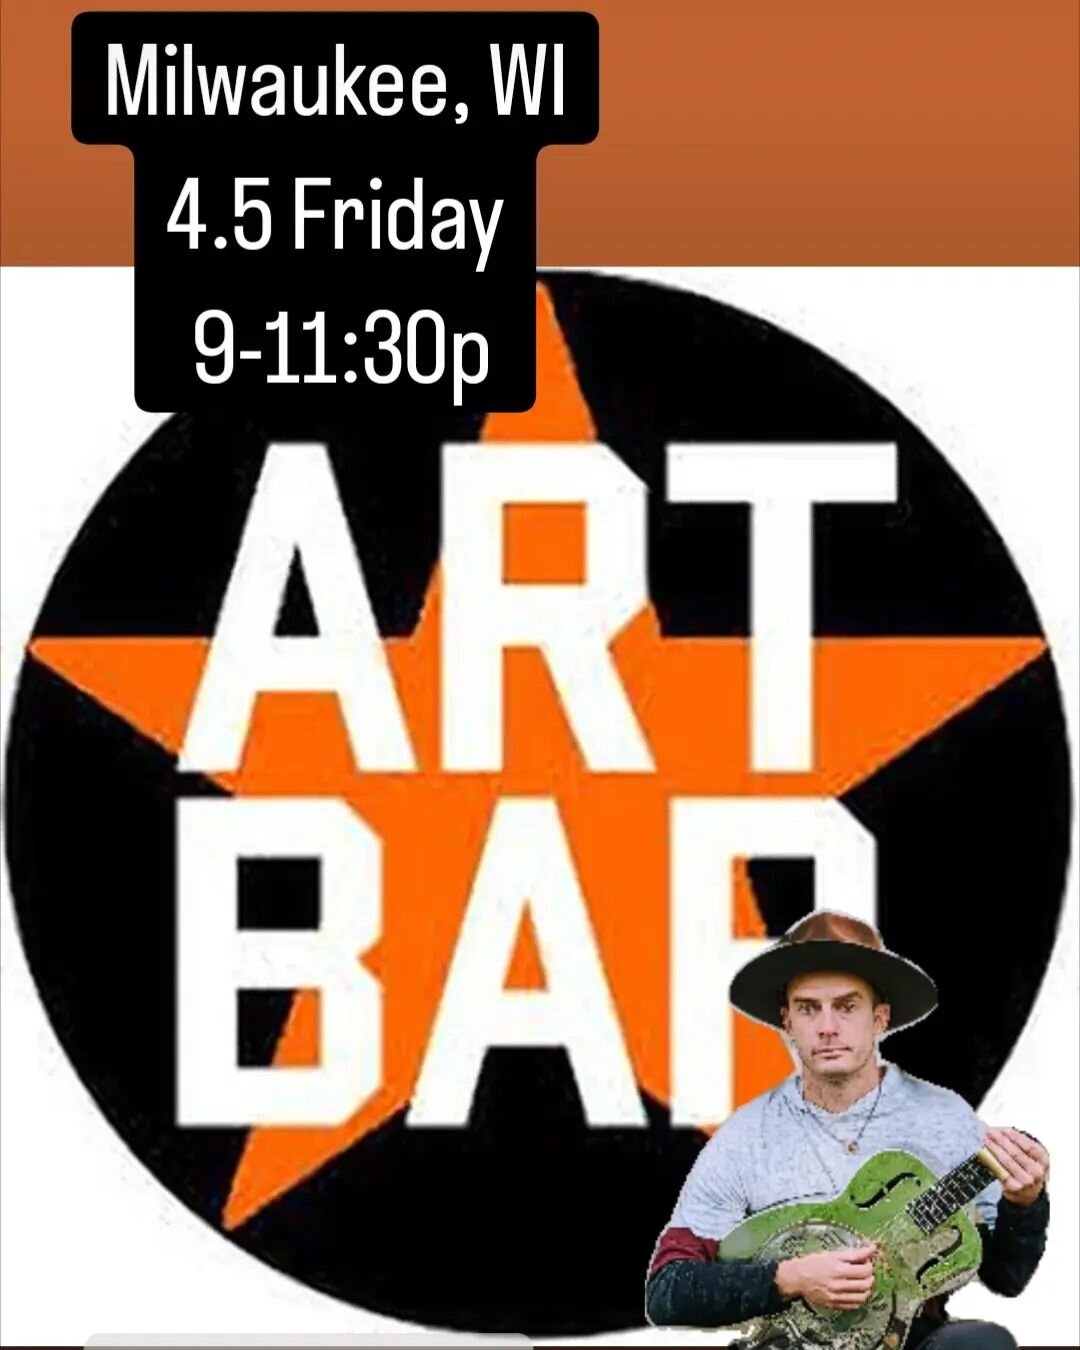 This Friday, River West area of Milwaukee, getting back to ArtBar - cool little spot, let's do this 🕺